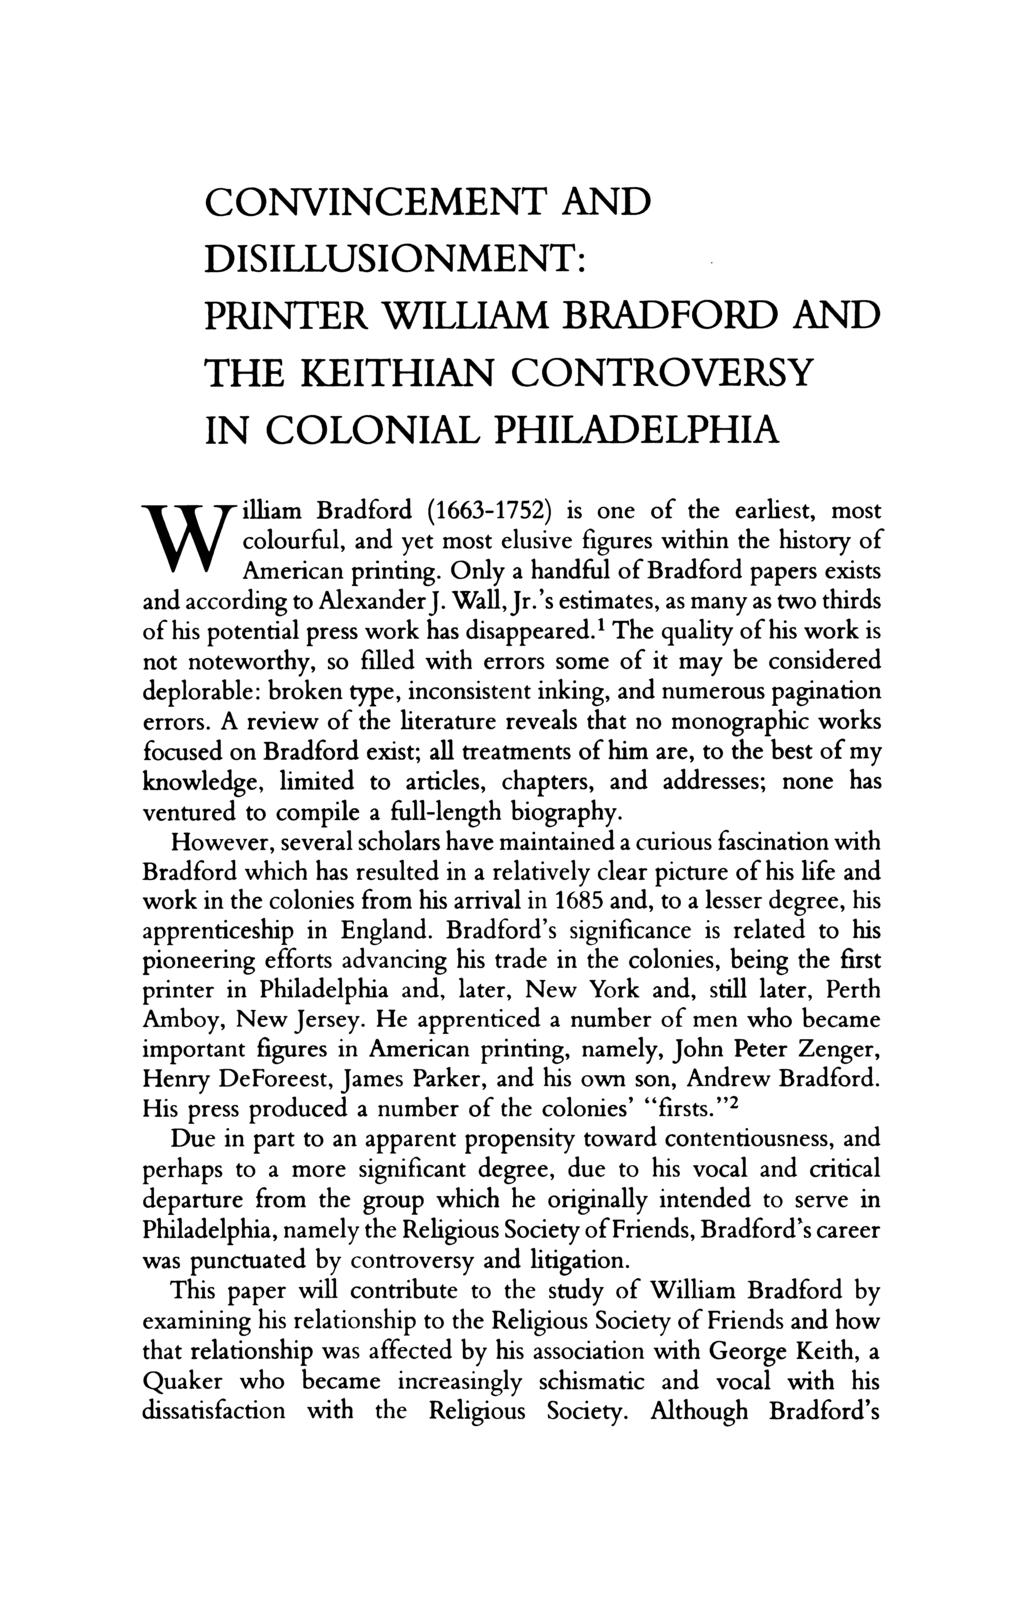 CONVINCEMENT AND DISILLUSIONMENT: PRINTER WILLIAM BRADFORD AND THE KEITHIAN CONTROVERSY IN COLONIAL PHILADELPHIA W illiam Bradford (1663-1752) is one of the earliest, most colourful, and yet most